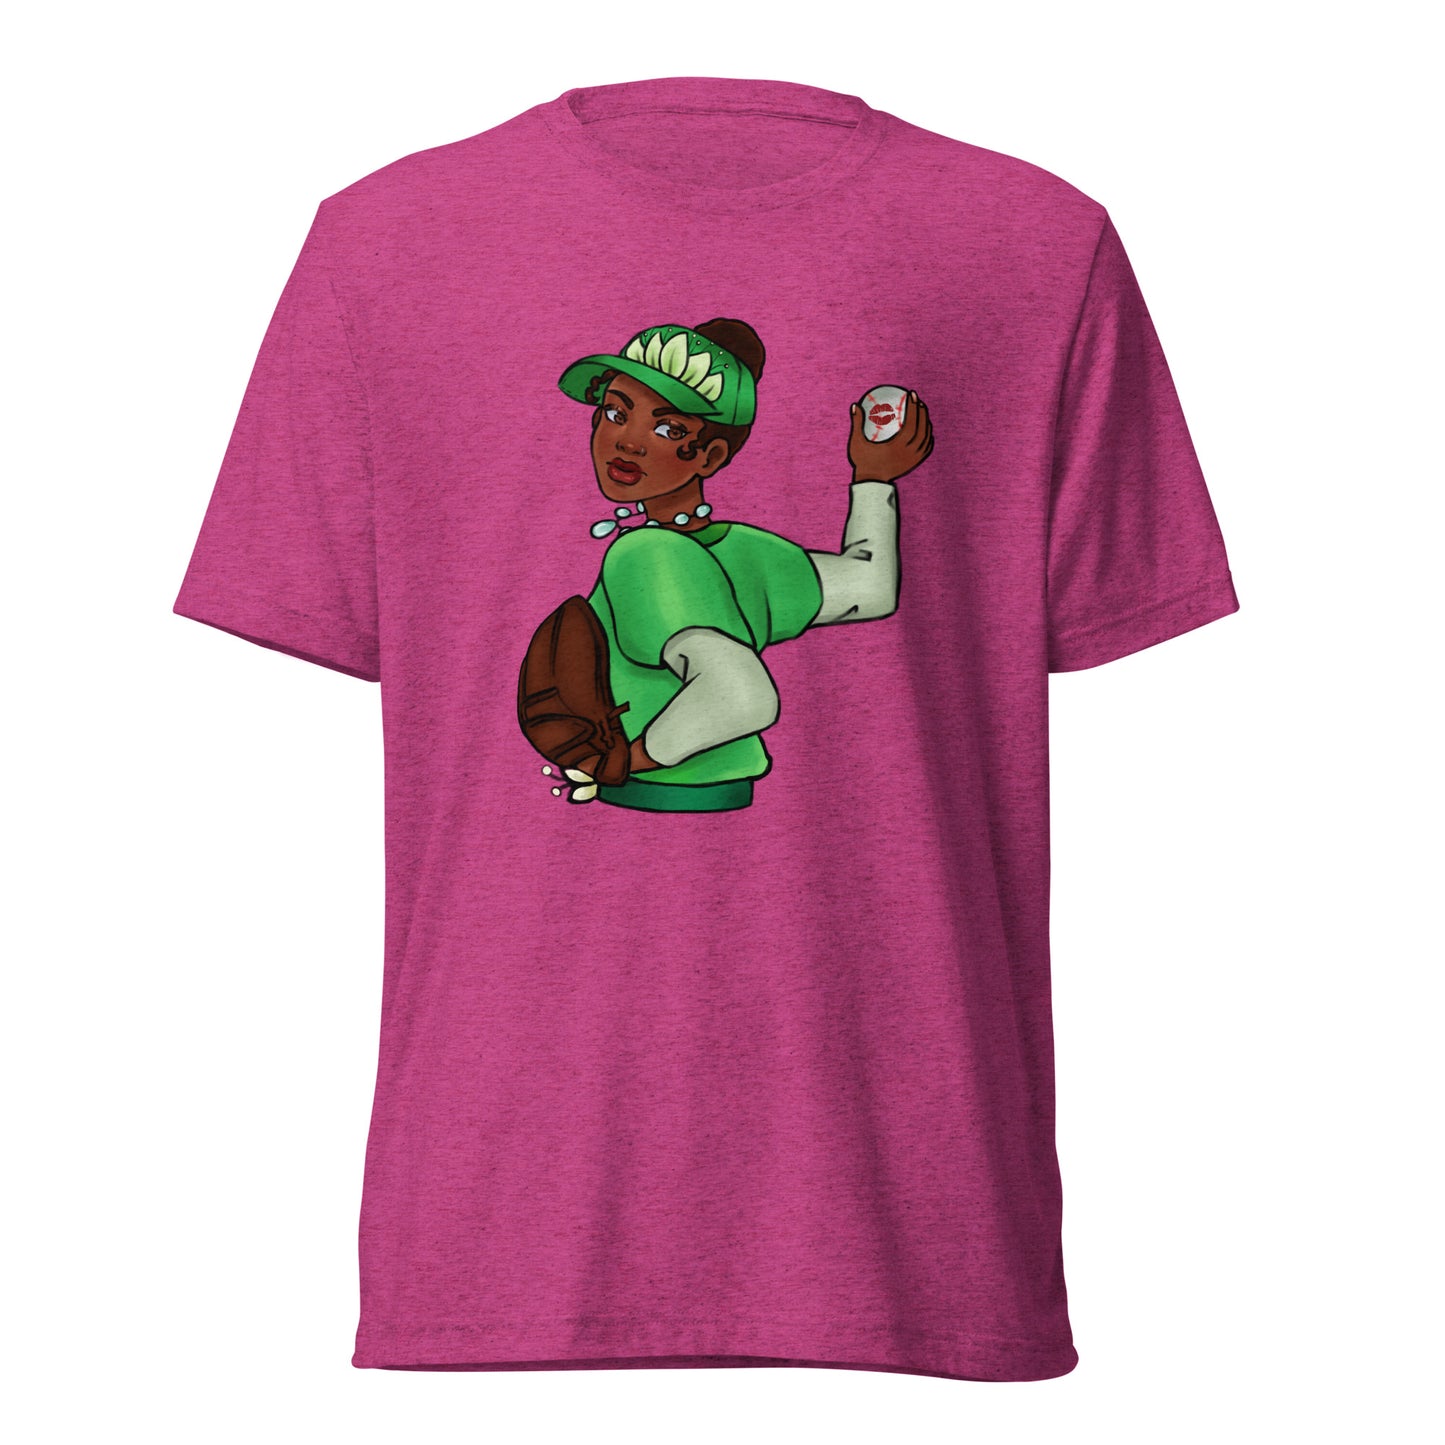 The Baller and the Frog - Unisex Tri-Blend Tee